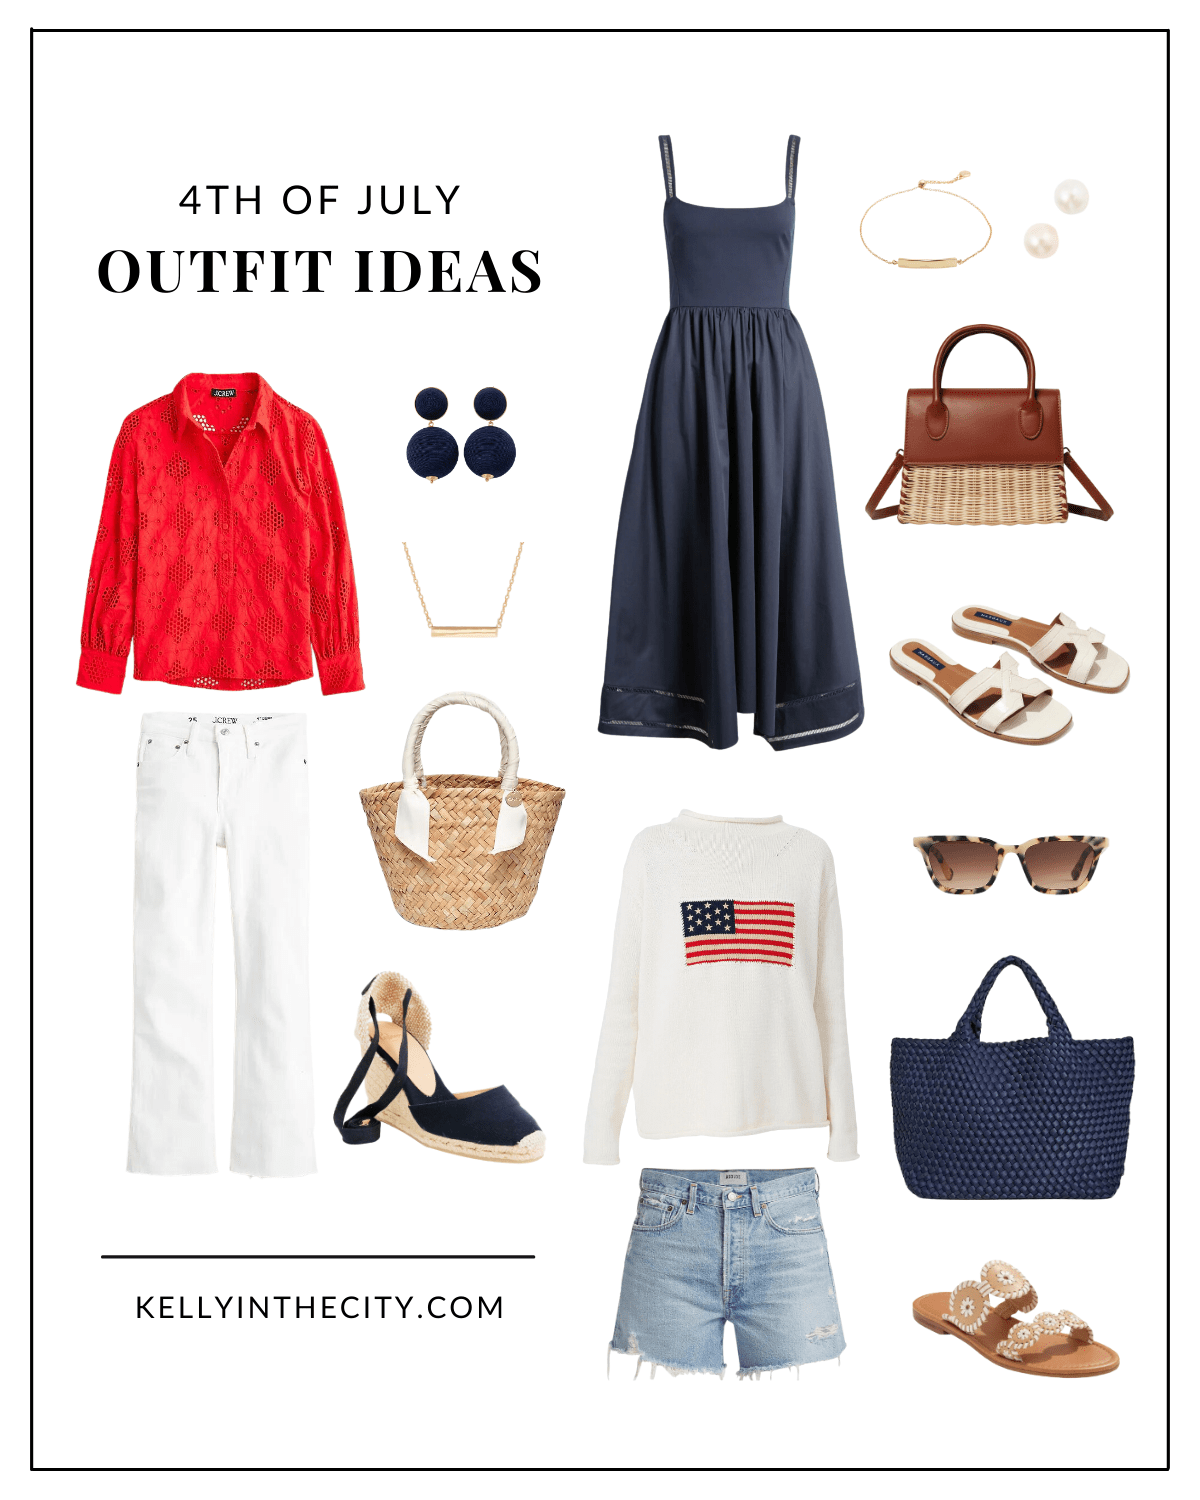 4th of July Outfits for a backyard cookout, 4th of July parade, and to watch fireworks